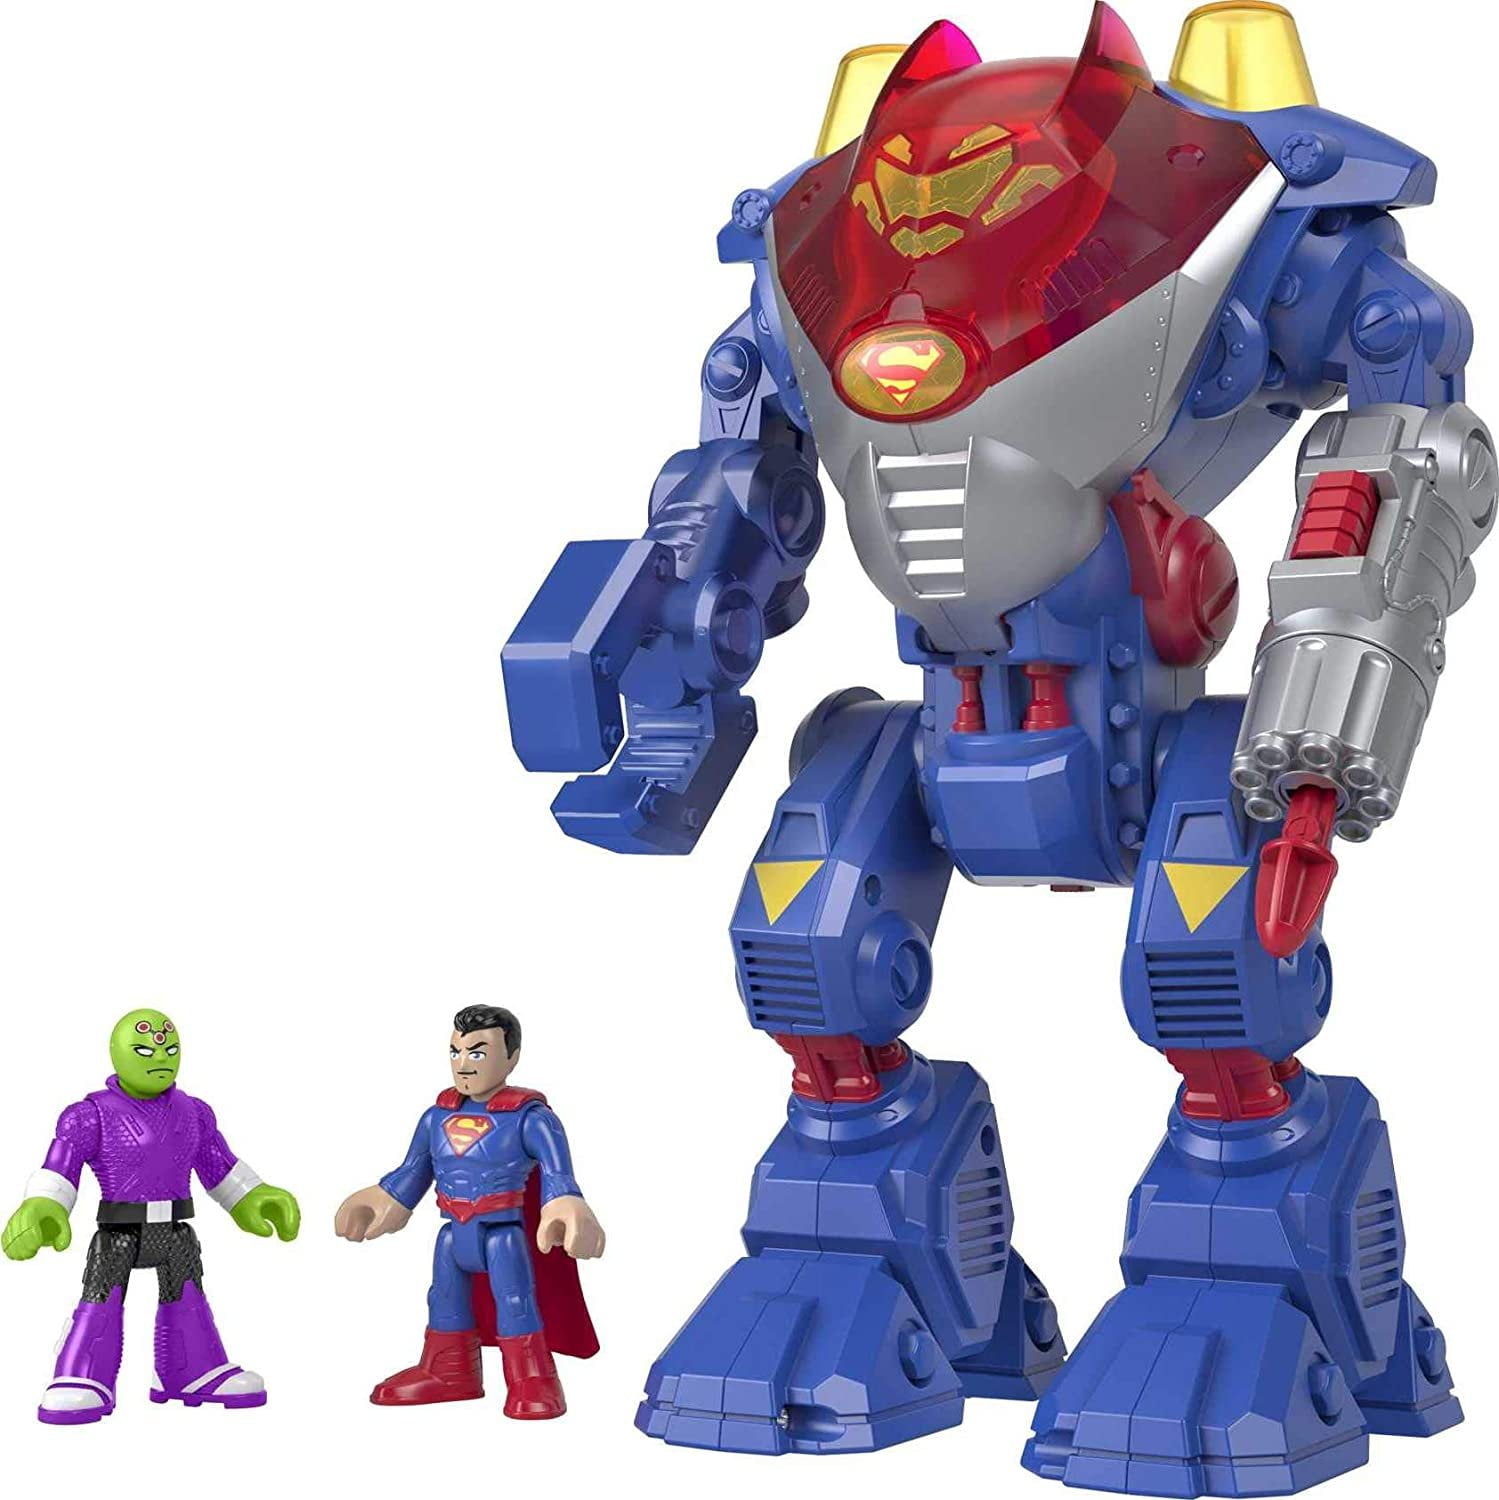 Imaginext DC Super Friends Superman Robot, robot toy playset with character  figures for preschool kids ages 3 to 8 years old 